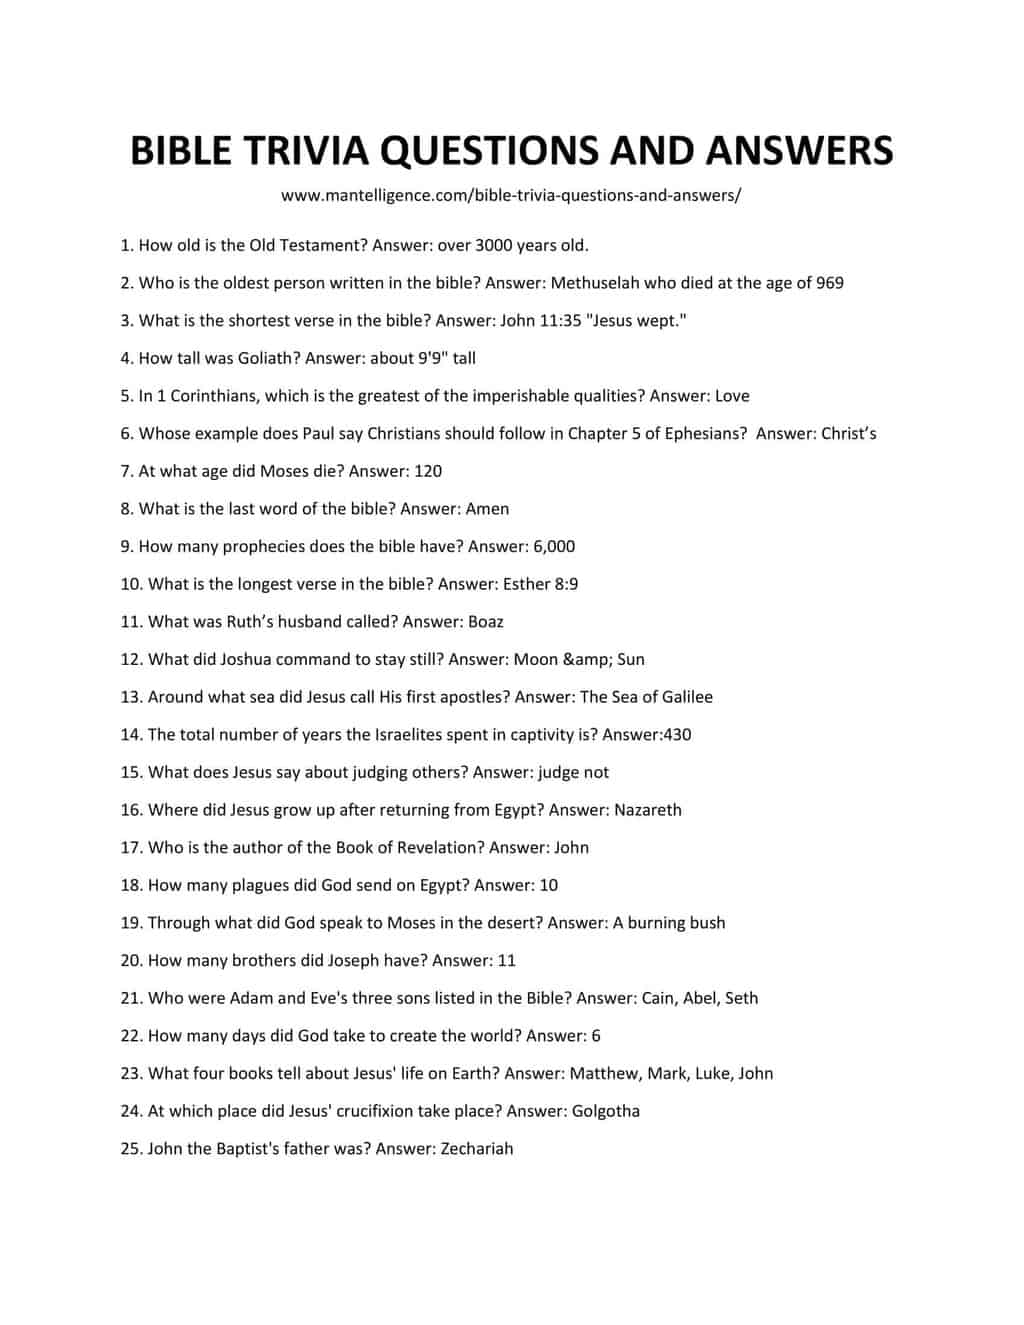 Downloadable list of Bible trivia questions and answers